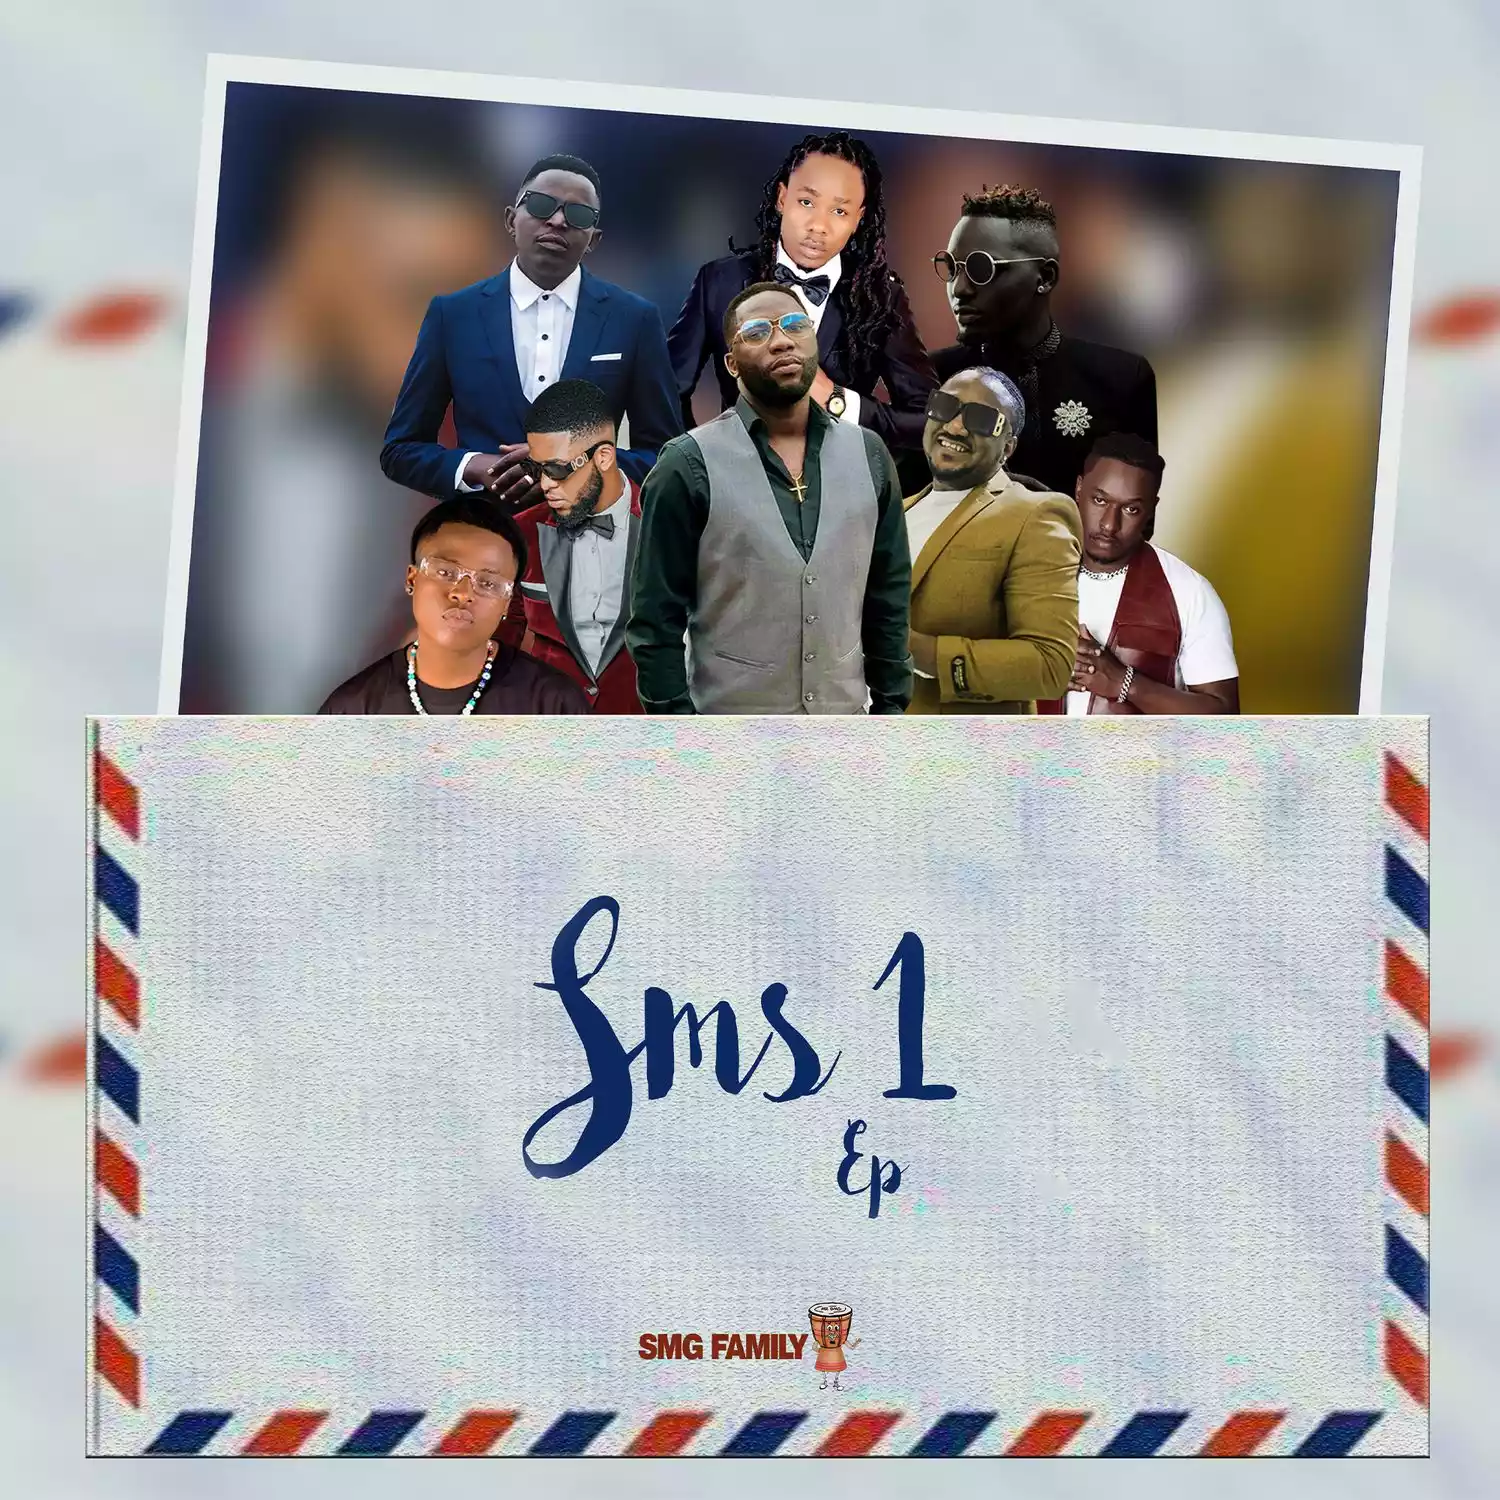 SMG Family SMS 1 EP Album Download